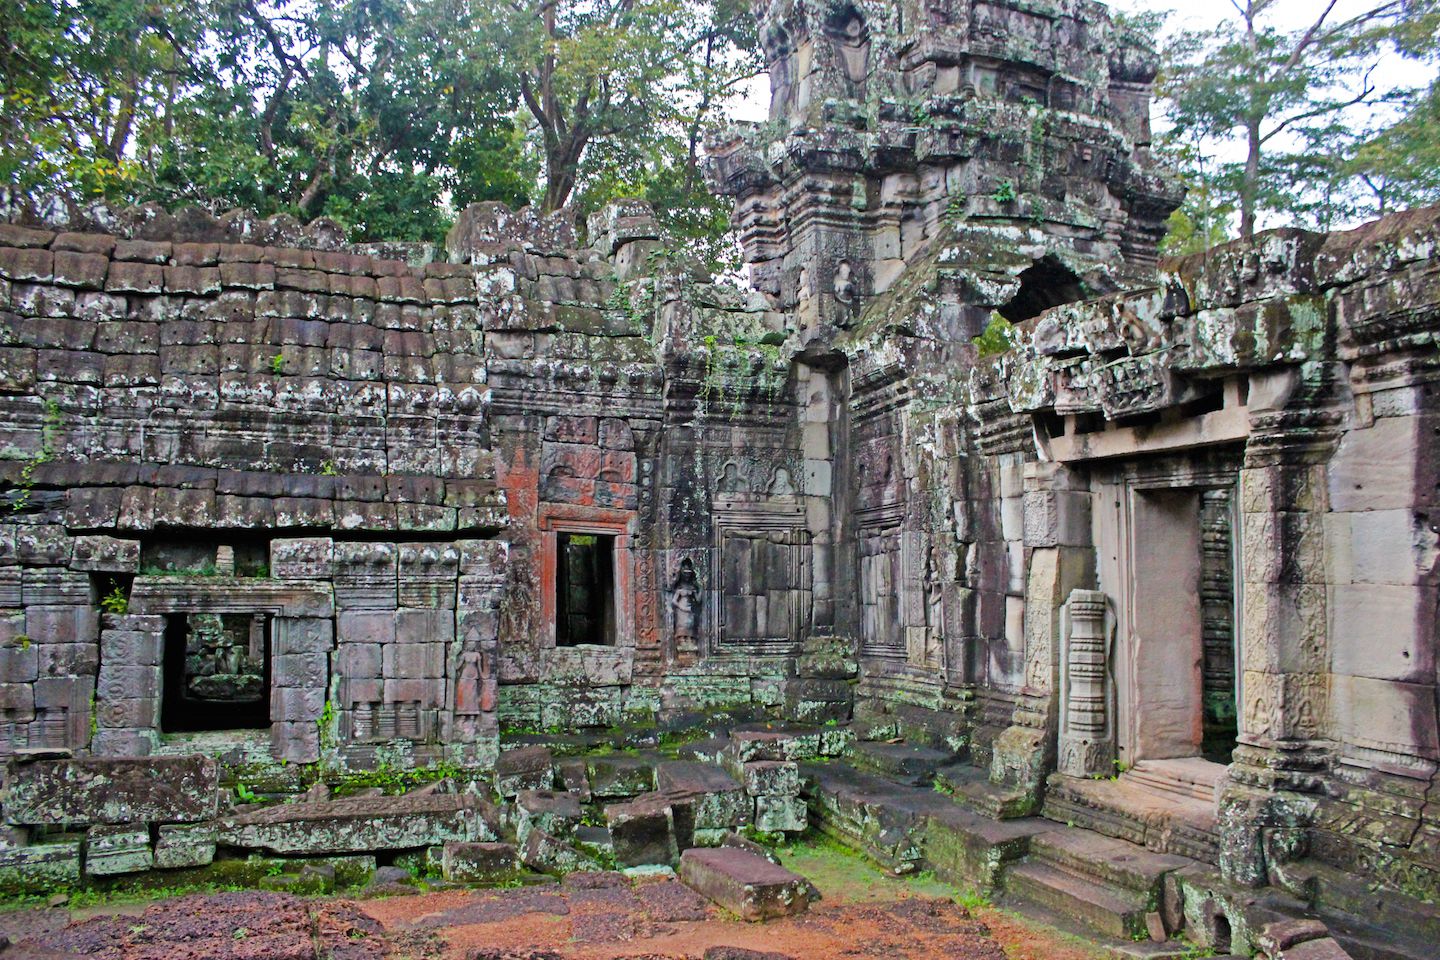 Galleries of Banteay Kdei